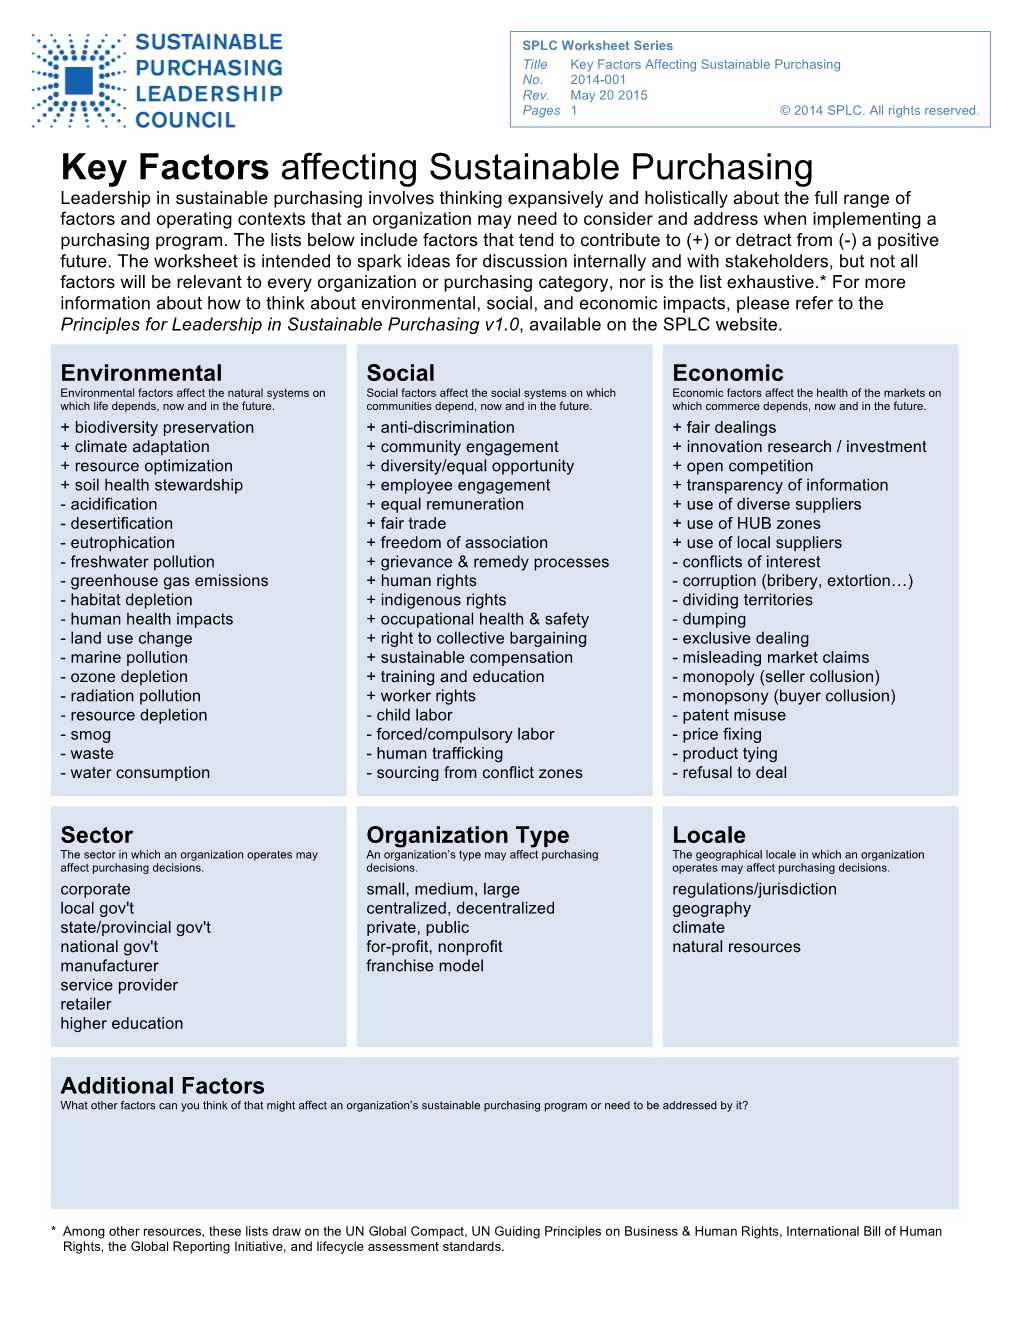 Key Factors Affecting Sustainable Purchasing No